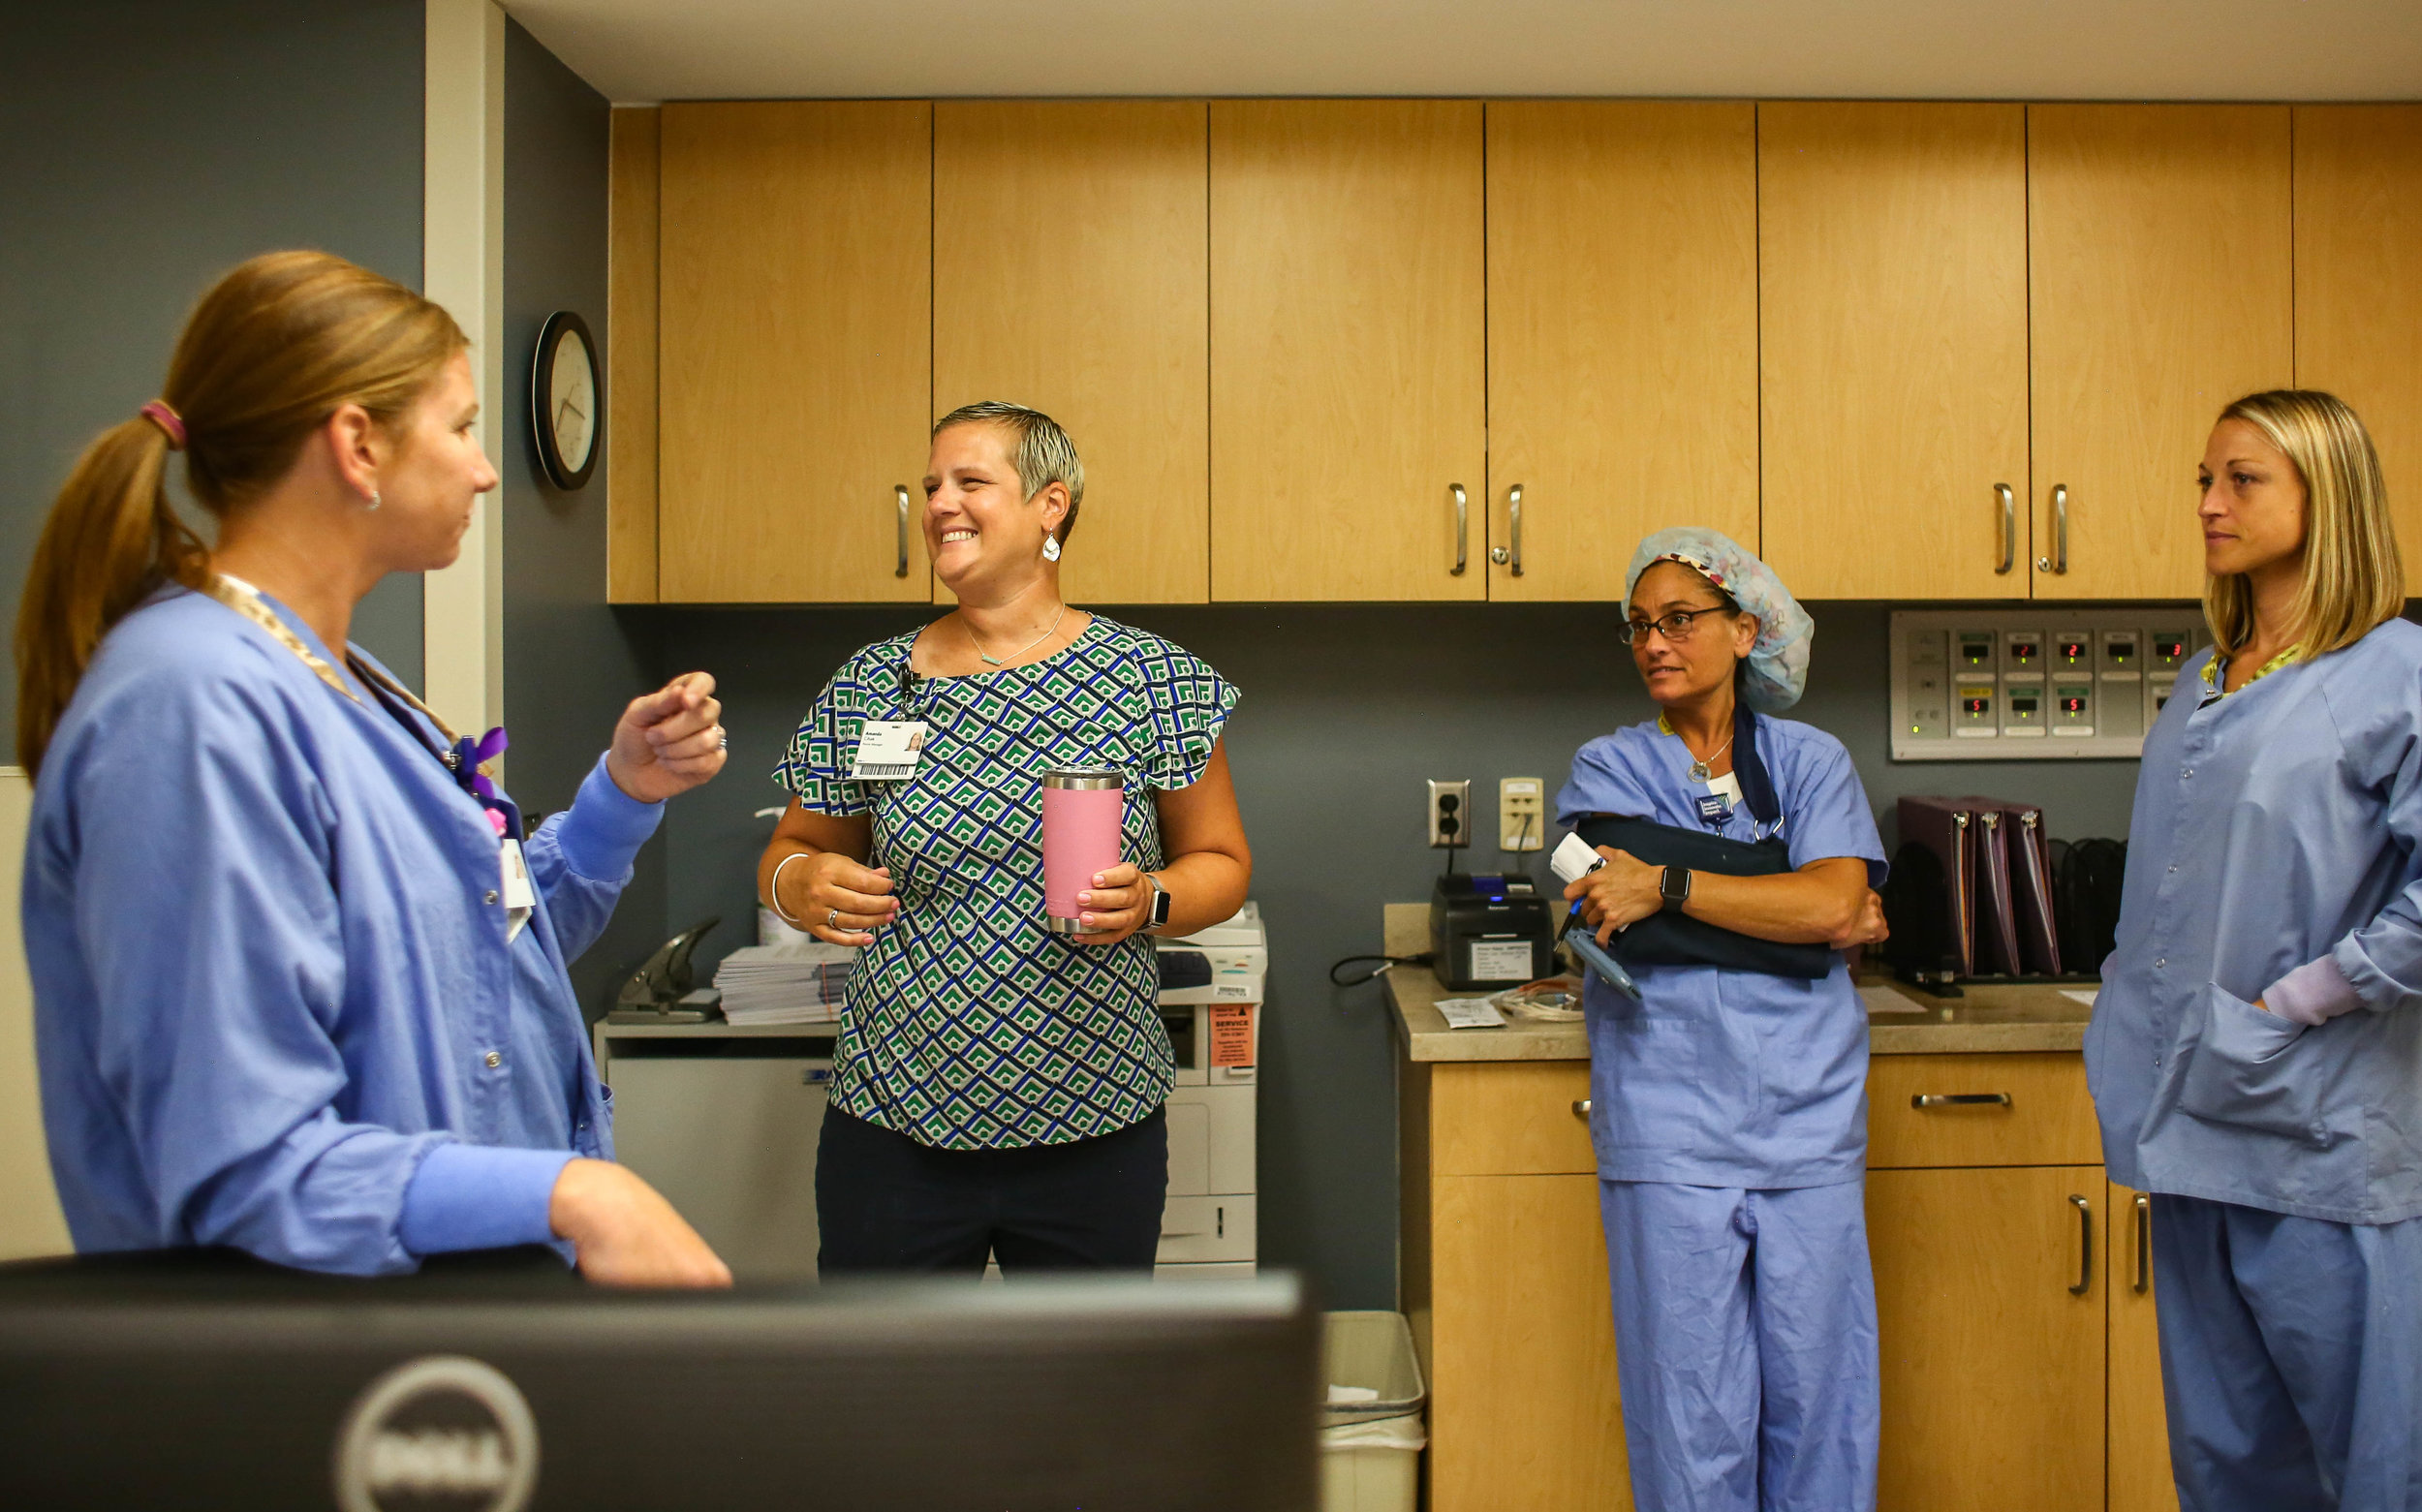  Amanda Cihak smiles as her co-workers welcome her back to work at Spectrum Health Gerber Memorial, in Fremont, Michigan on Monday, July 22, 2019. 